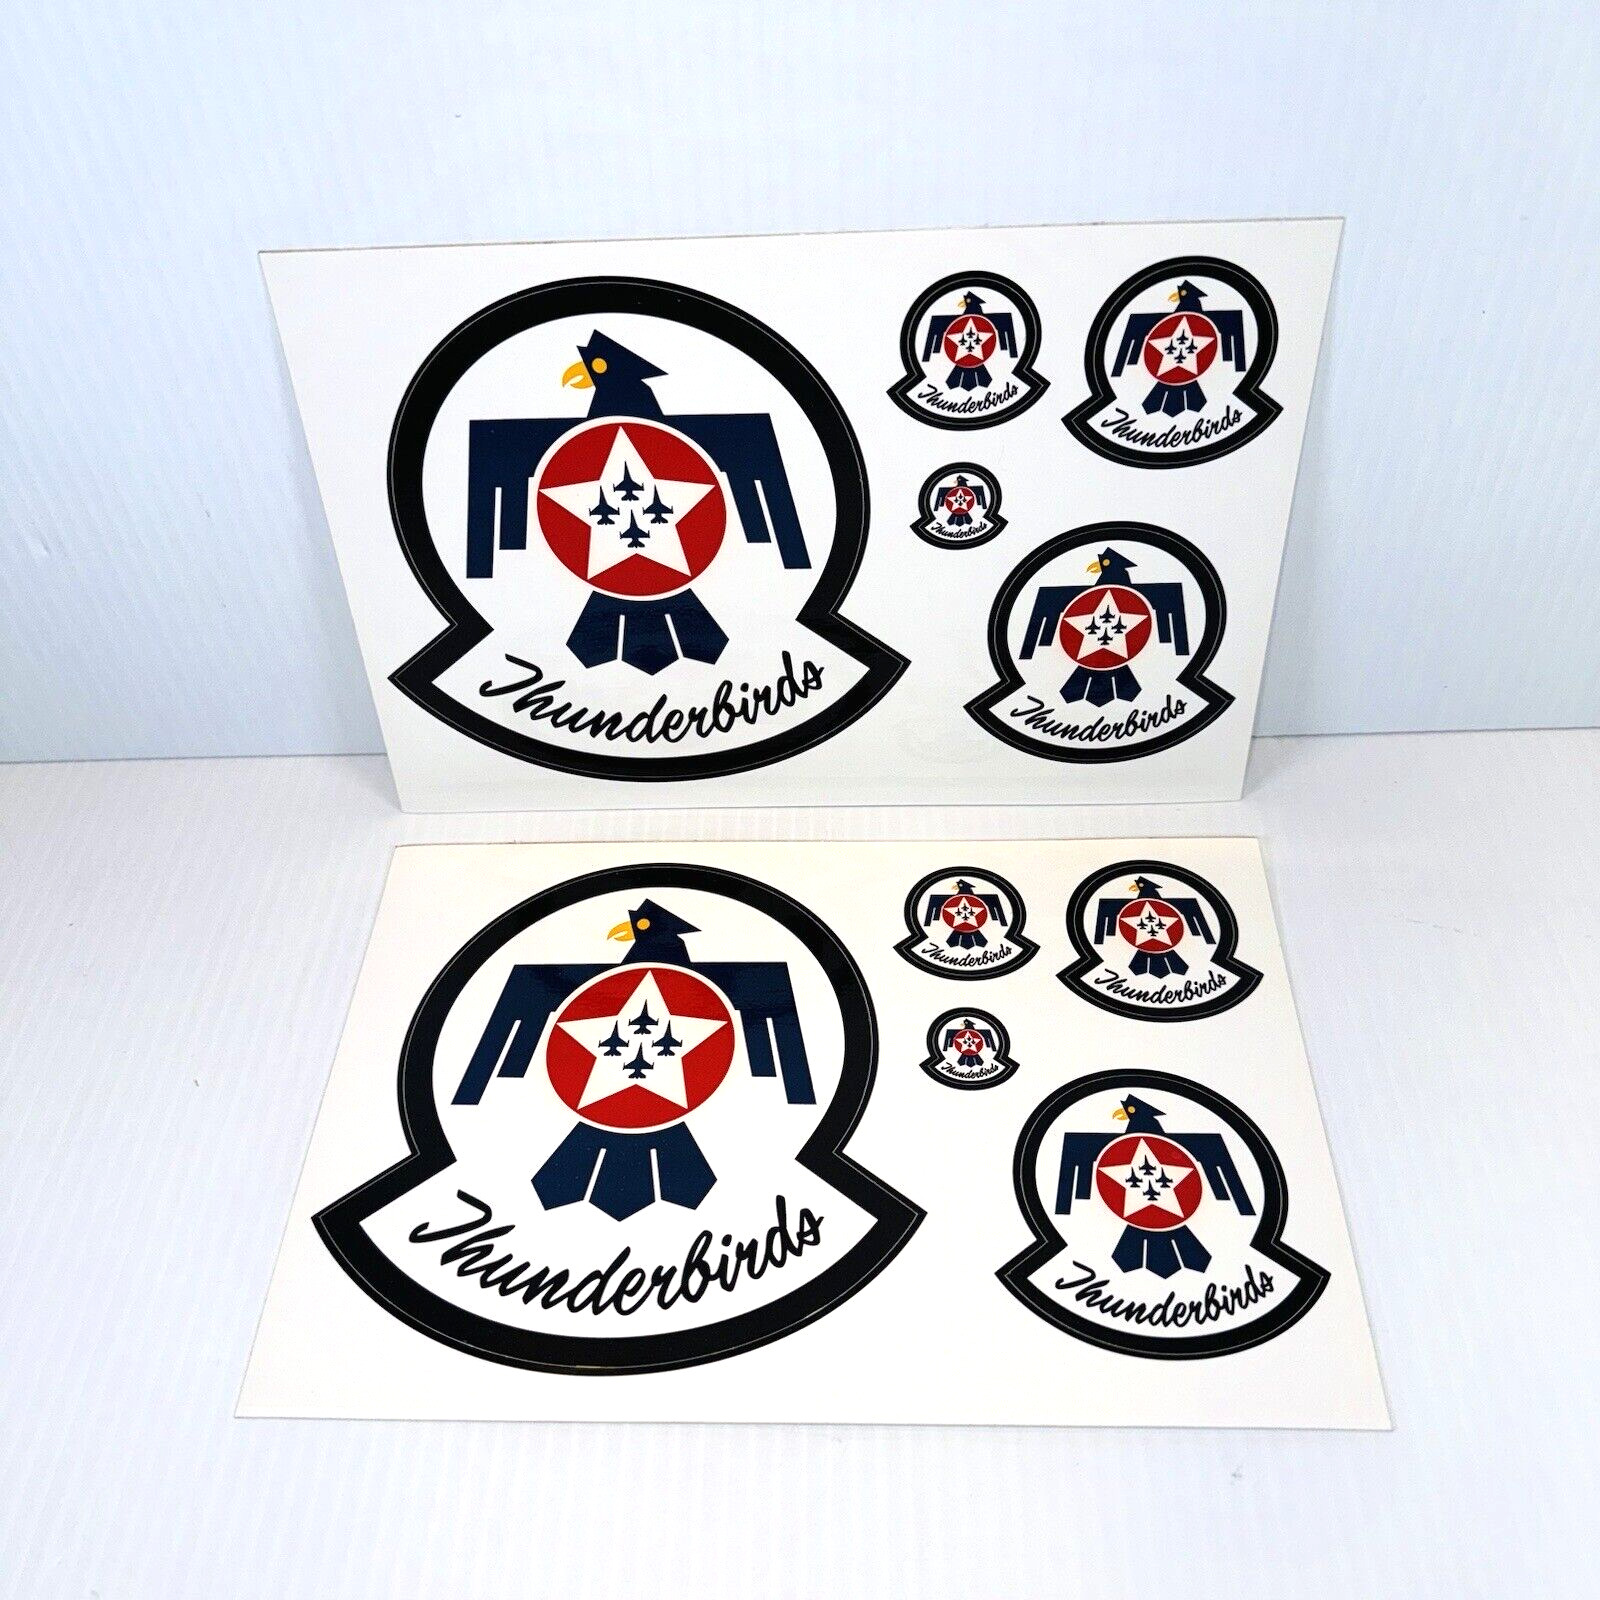 United States Air Force Official Thunderbirds Sticker Sheets - Lot of 2 - New